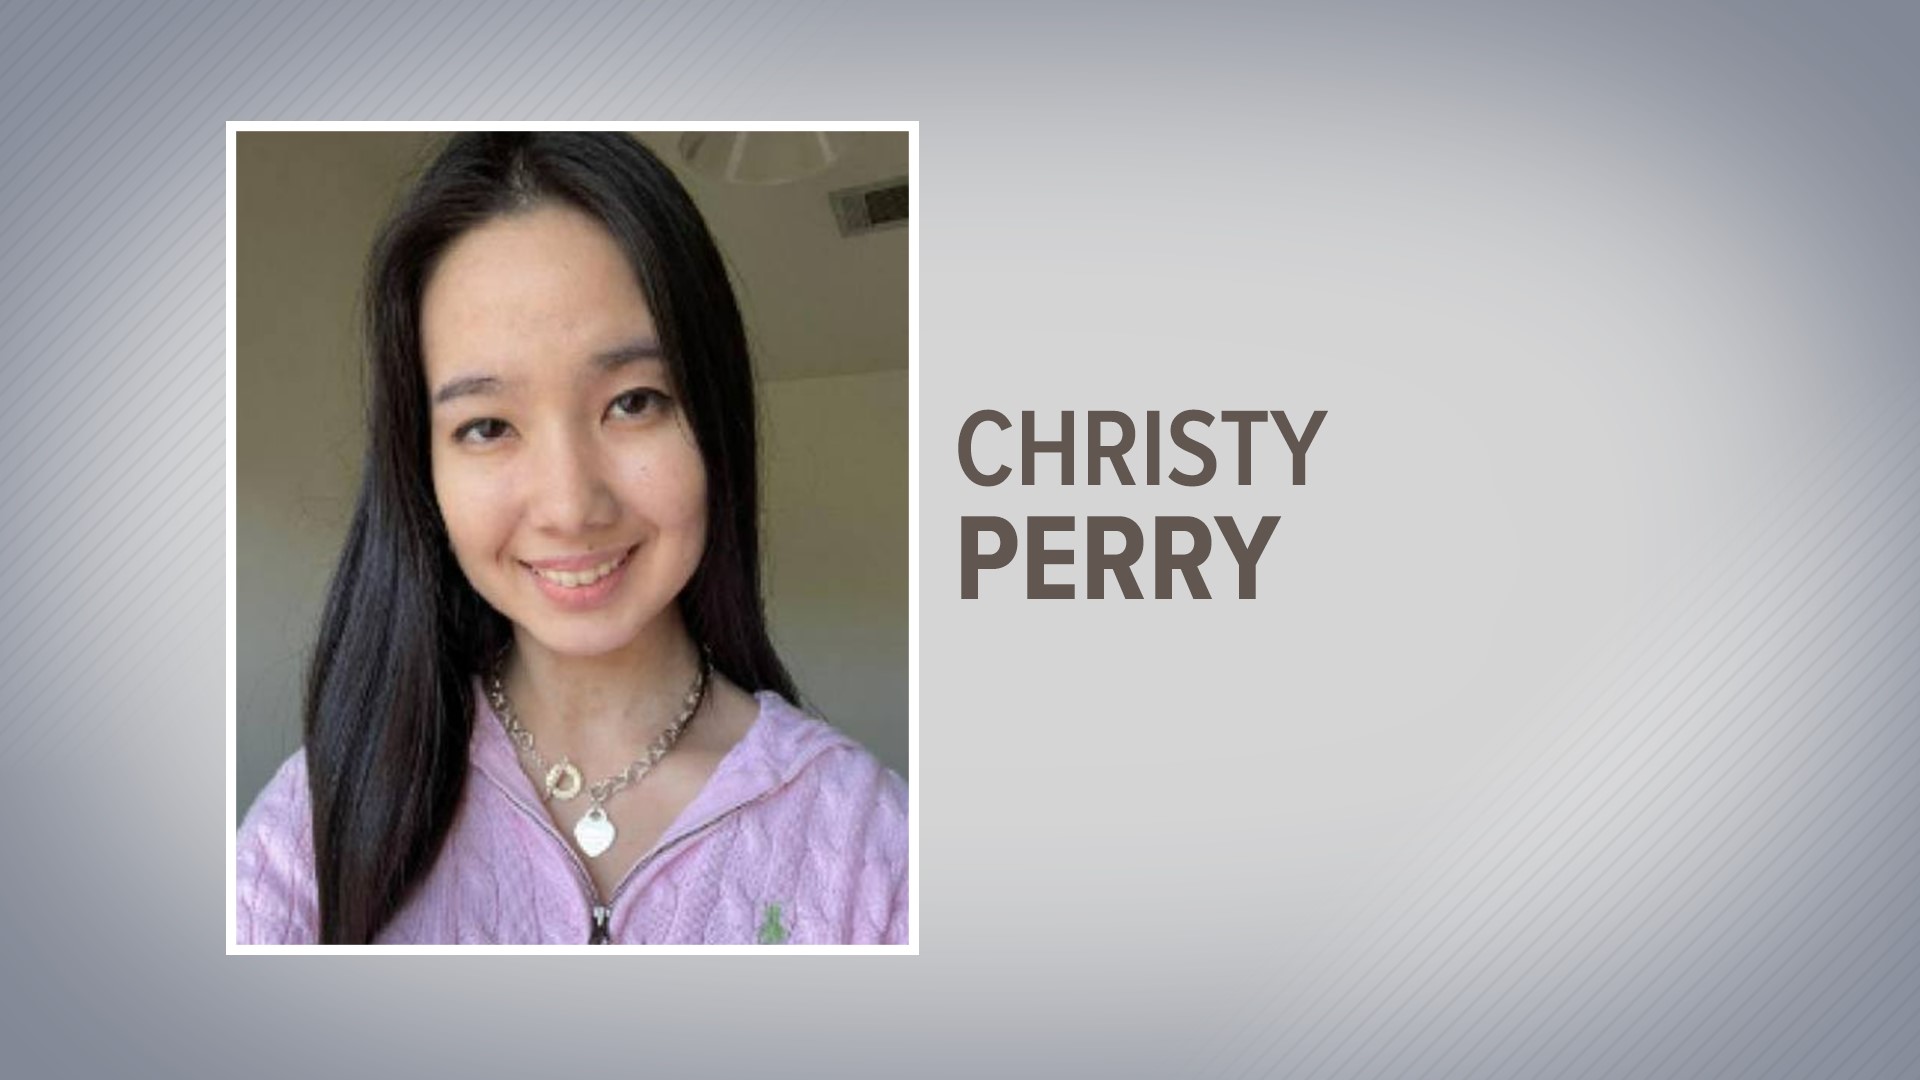 Christy Perry was reported missing more than a week ago when she didn't show up for her camping reservation at Big Bend National Park.